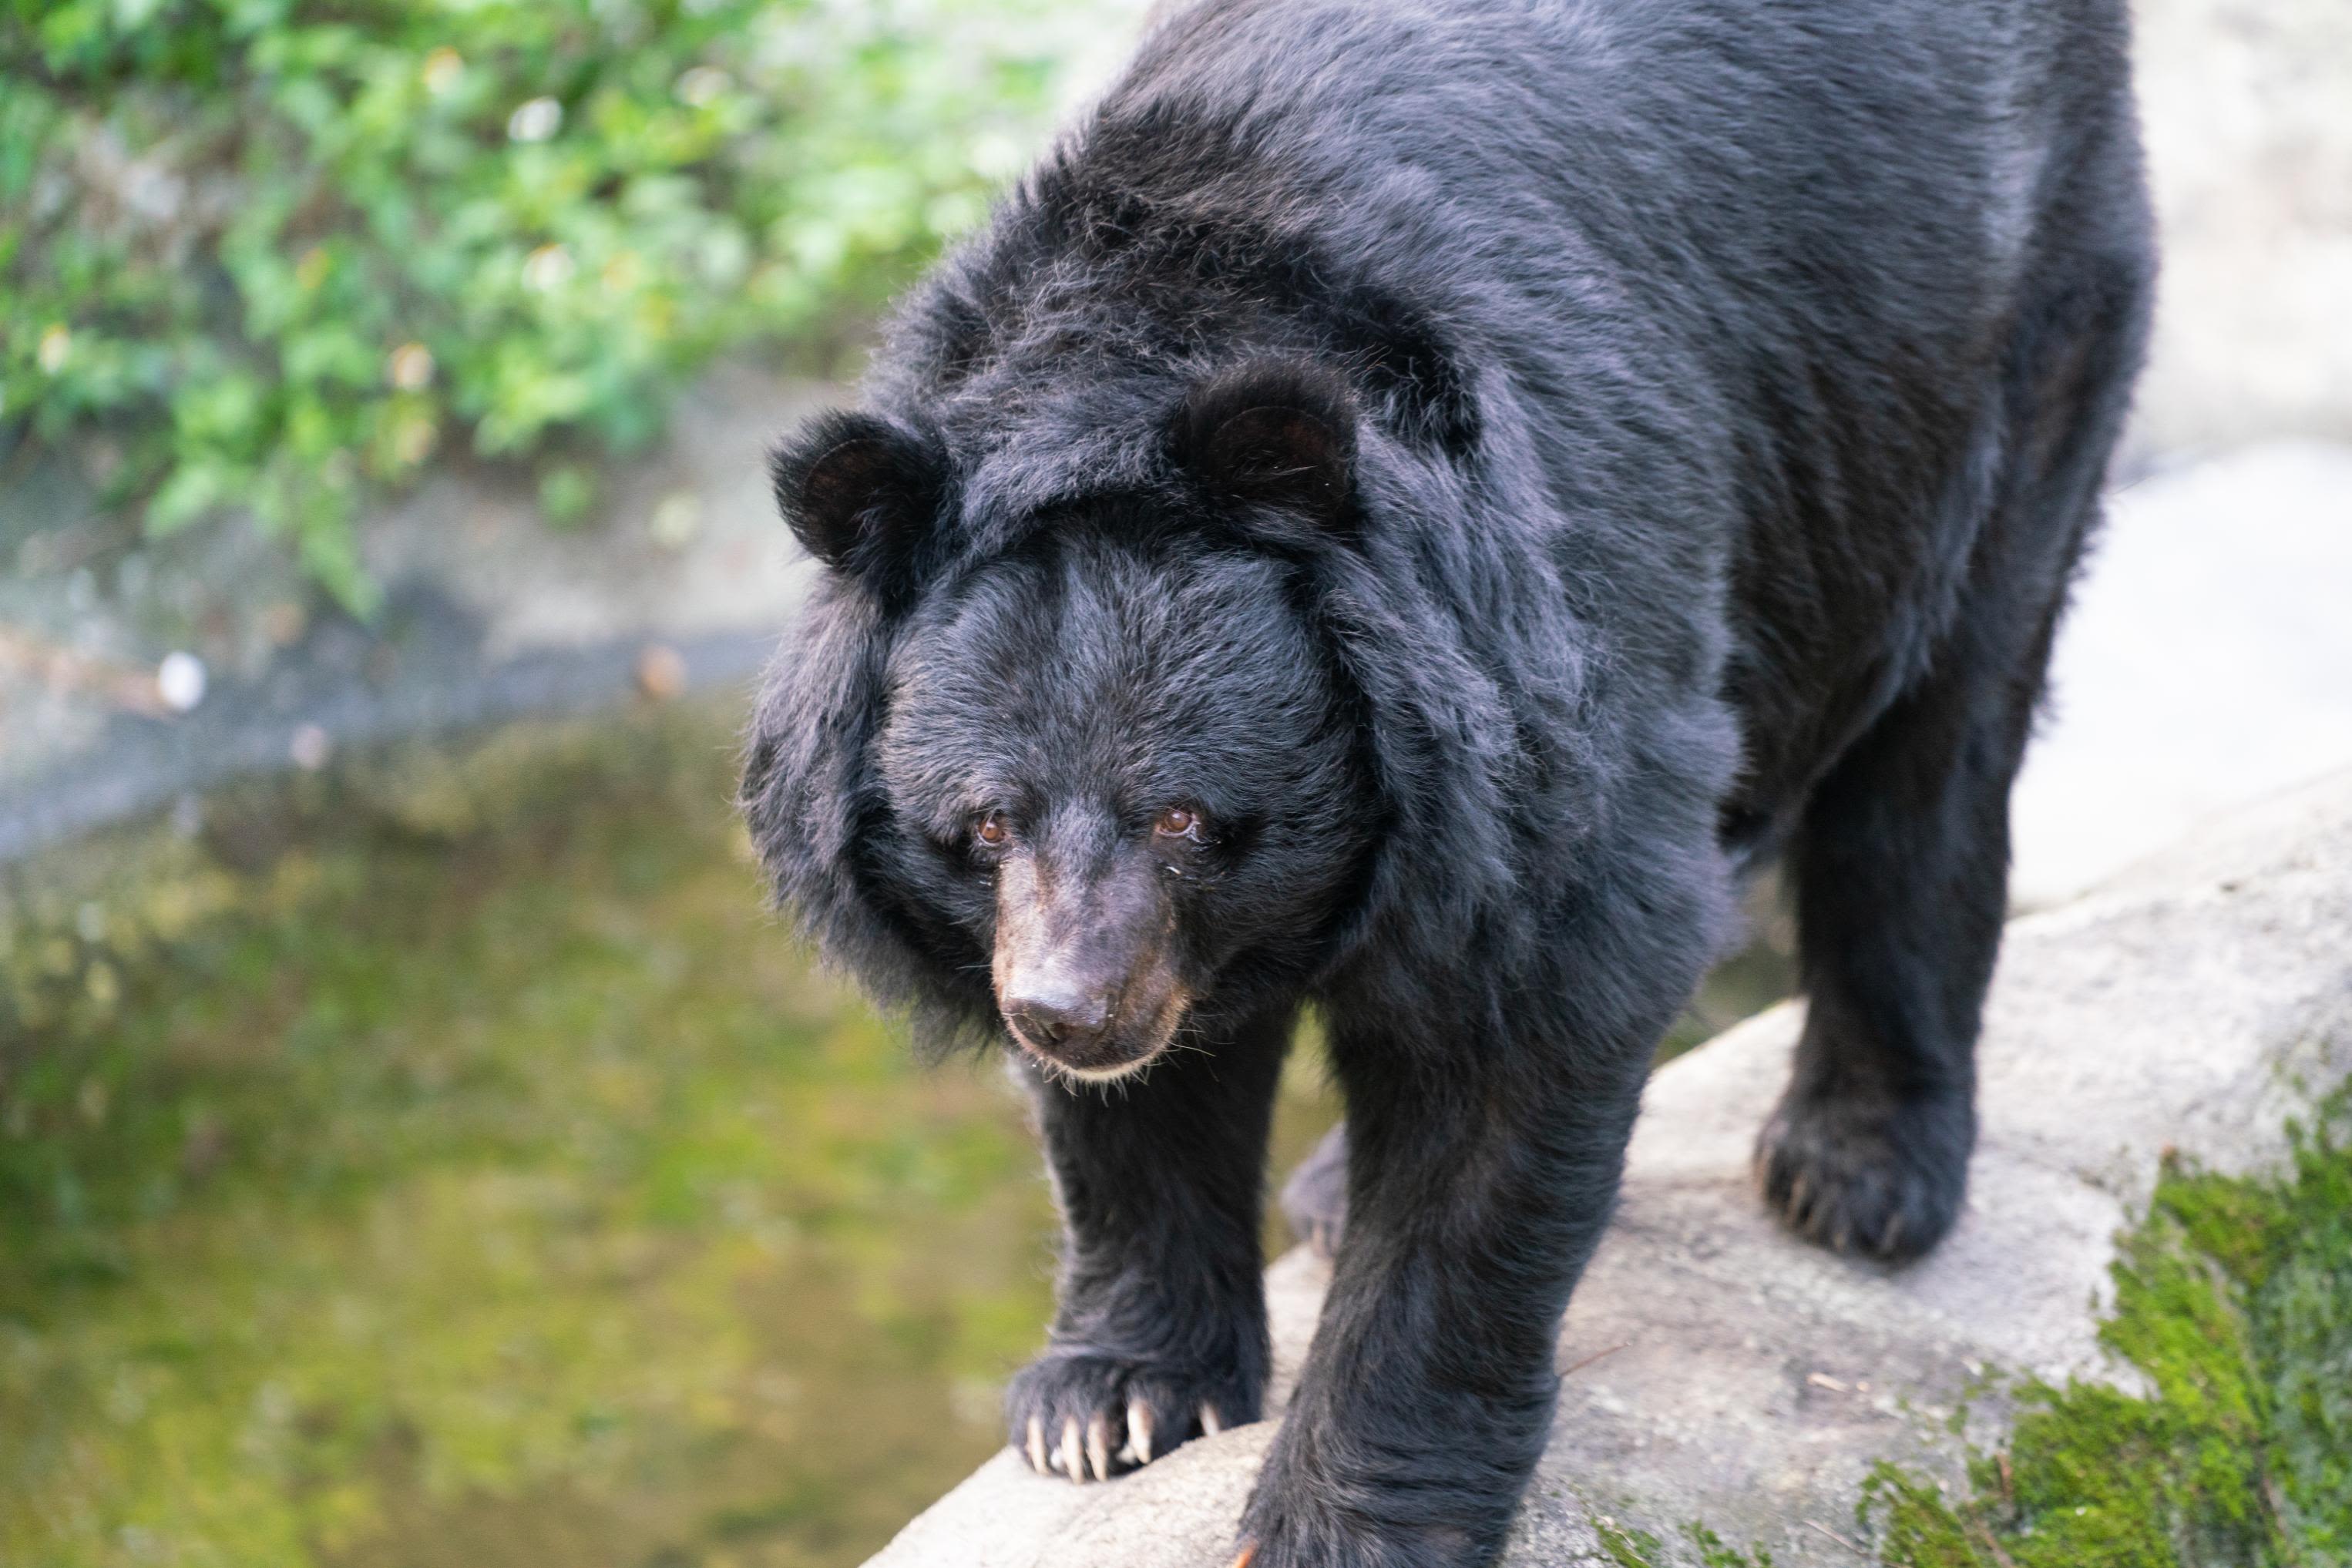 Taiwan used to be home to a huge number of bears. No one really